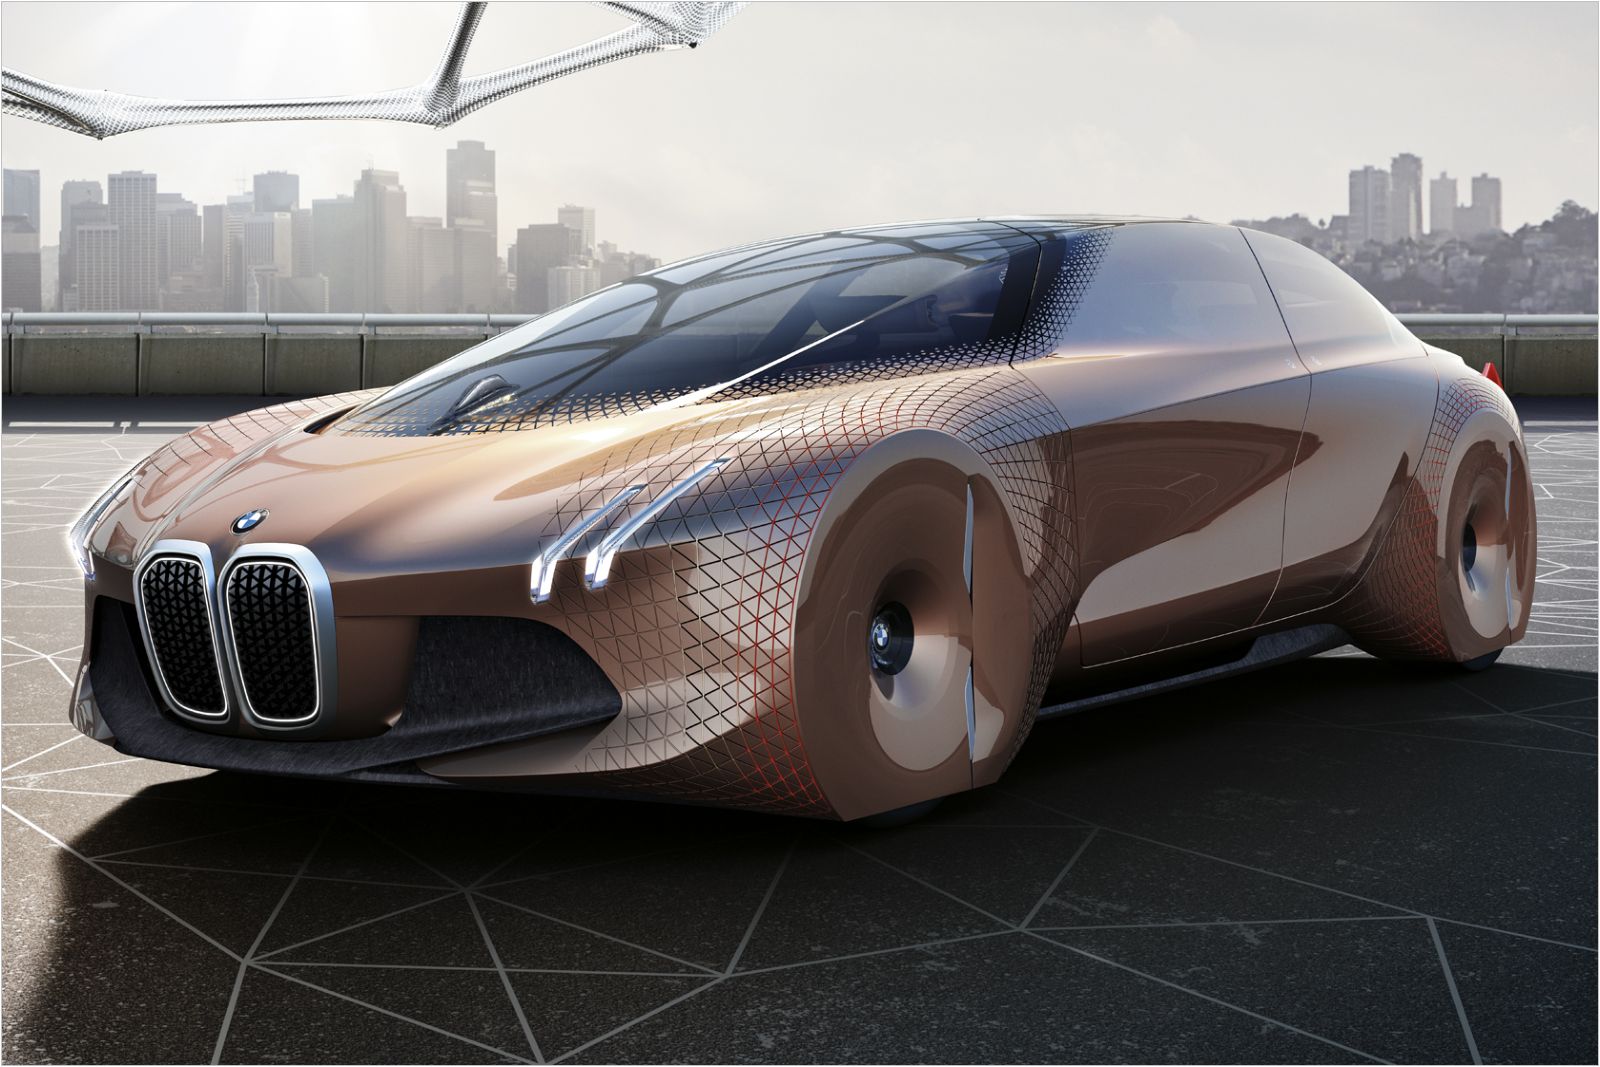 BMW Vision Next 100 Concept, 1600x1067px, img-1